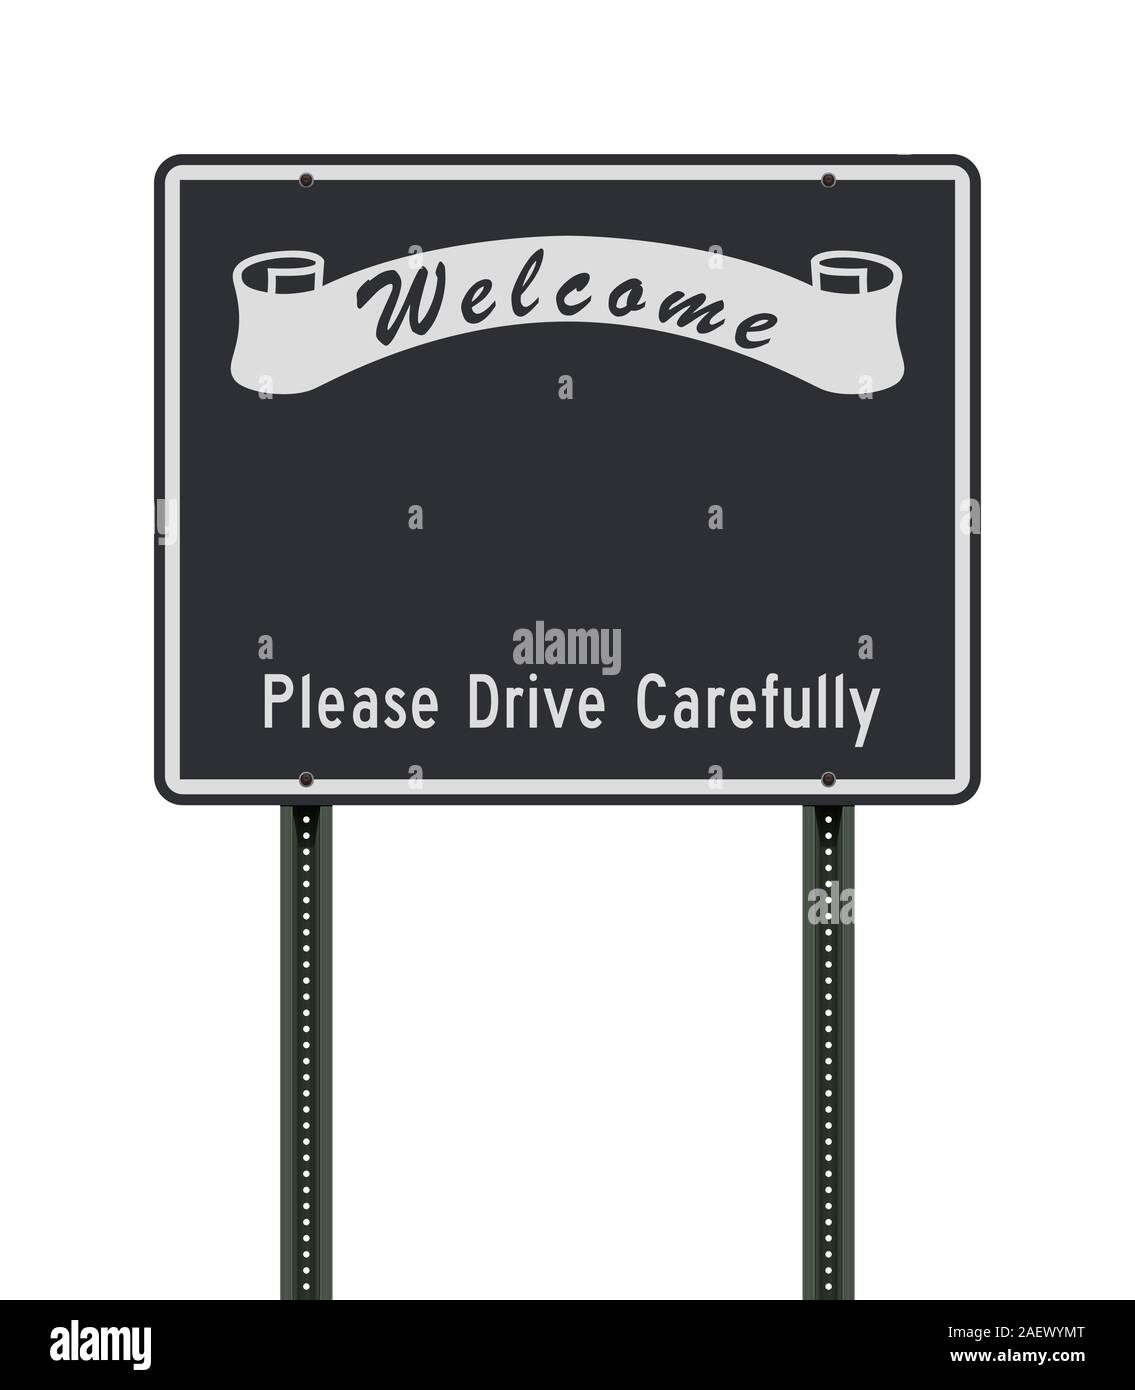 Vector illustration of a empty Welcome road sign template Stock Vector